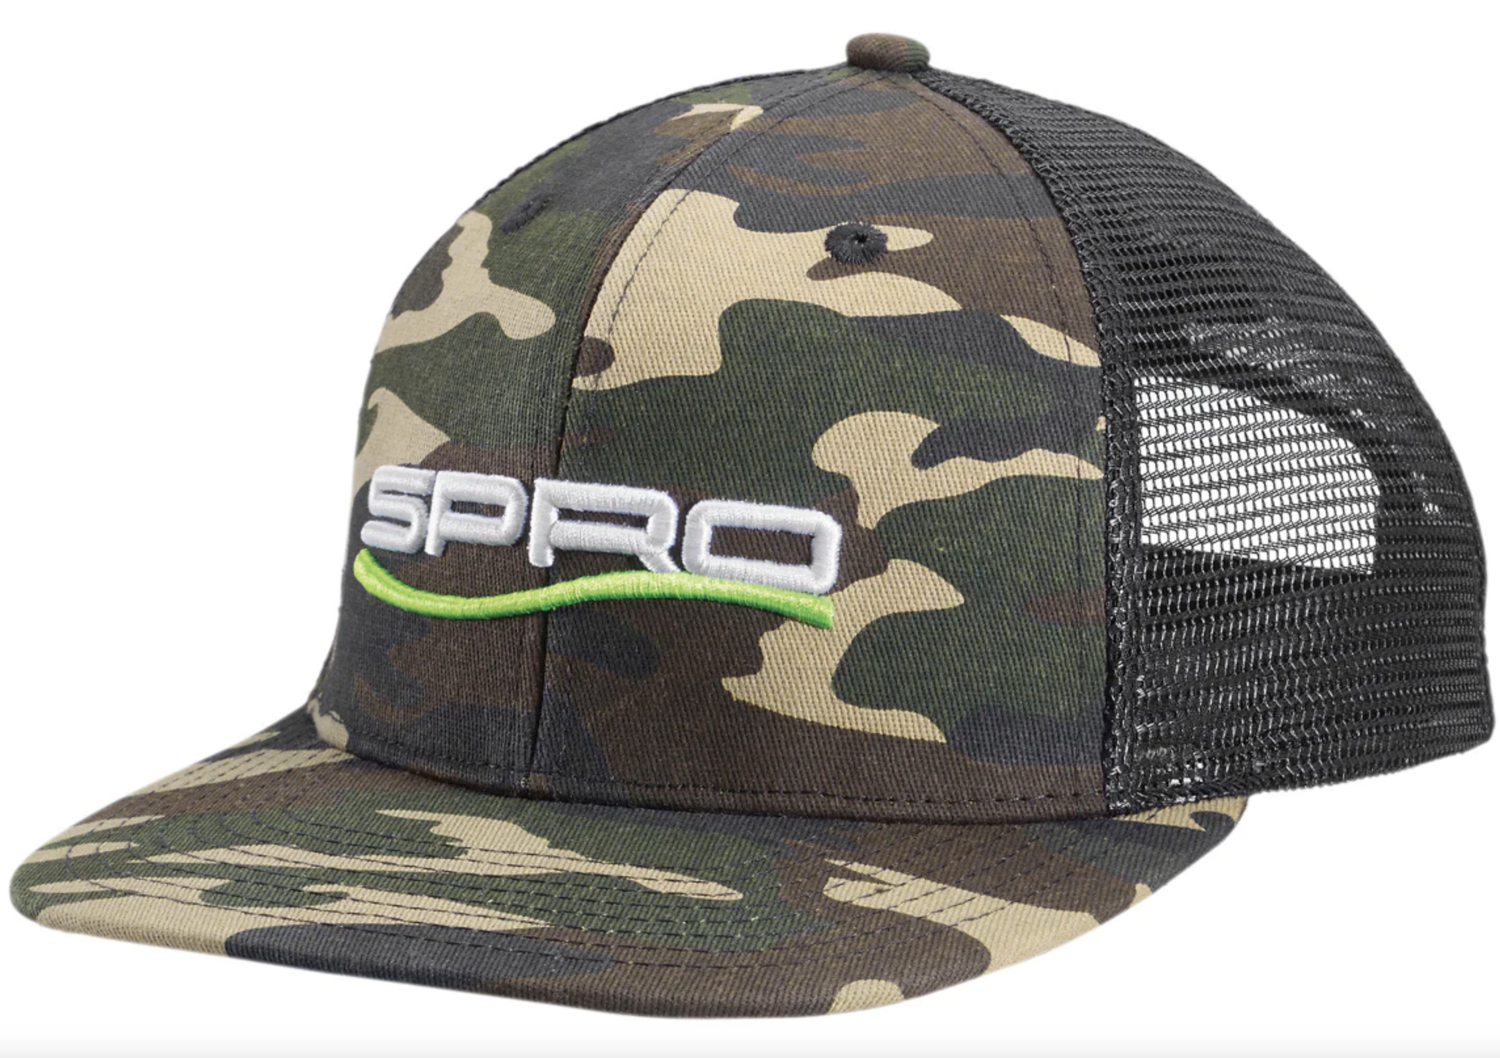 Spro Hats